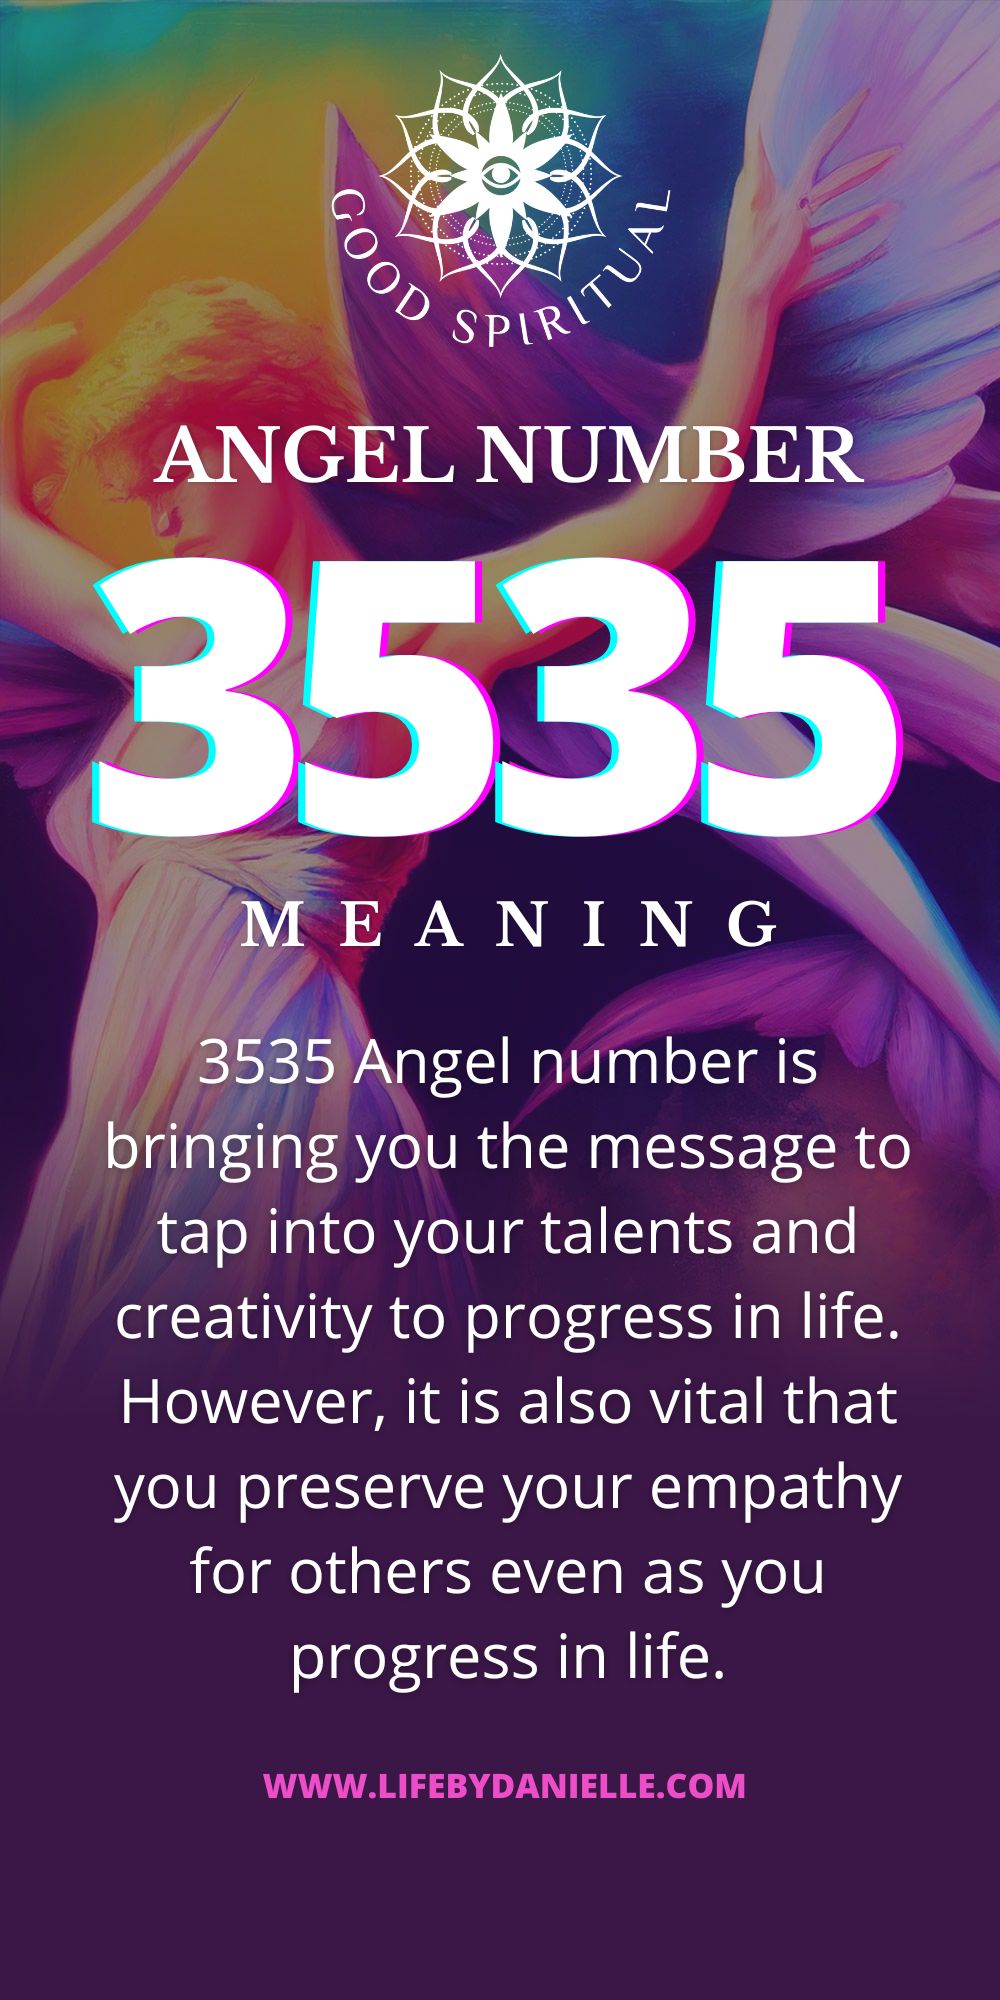 Angel Number 3535 Meaning